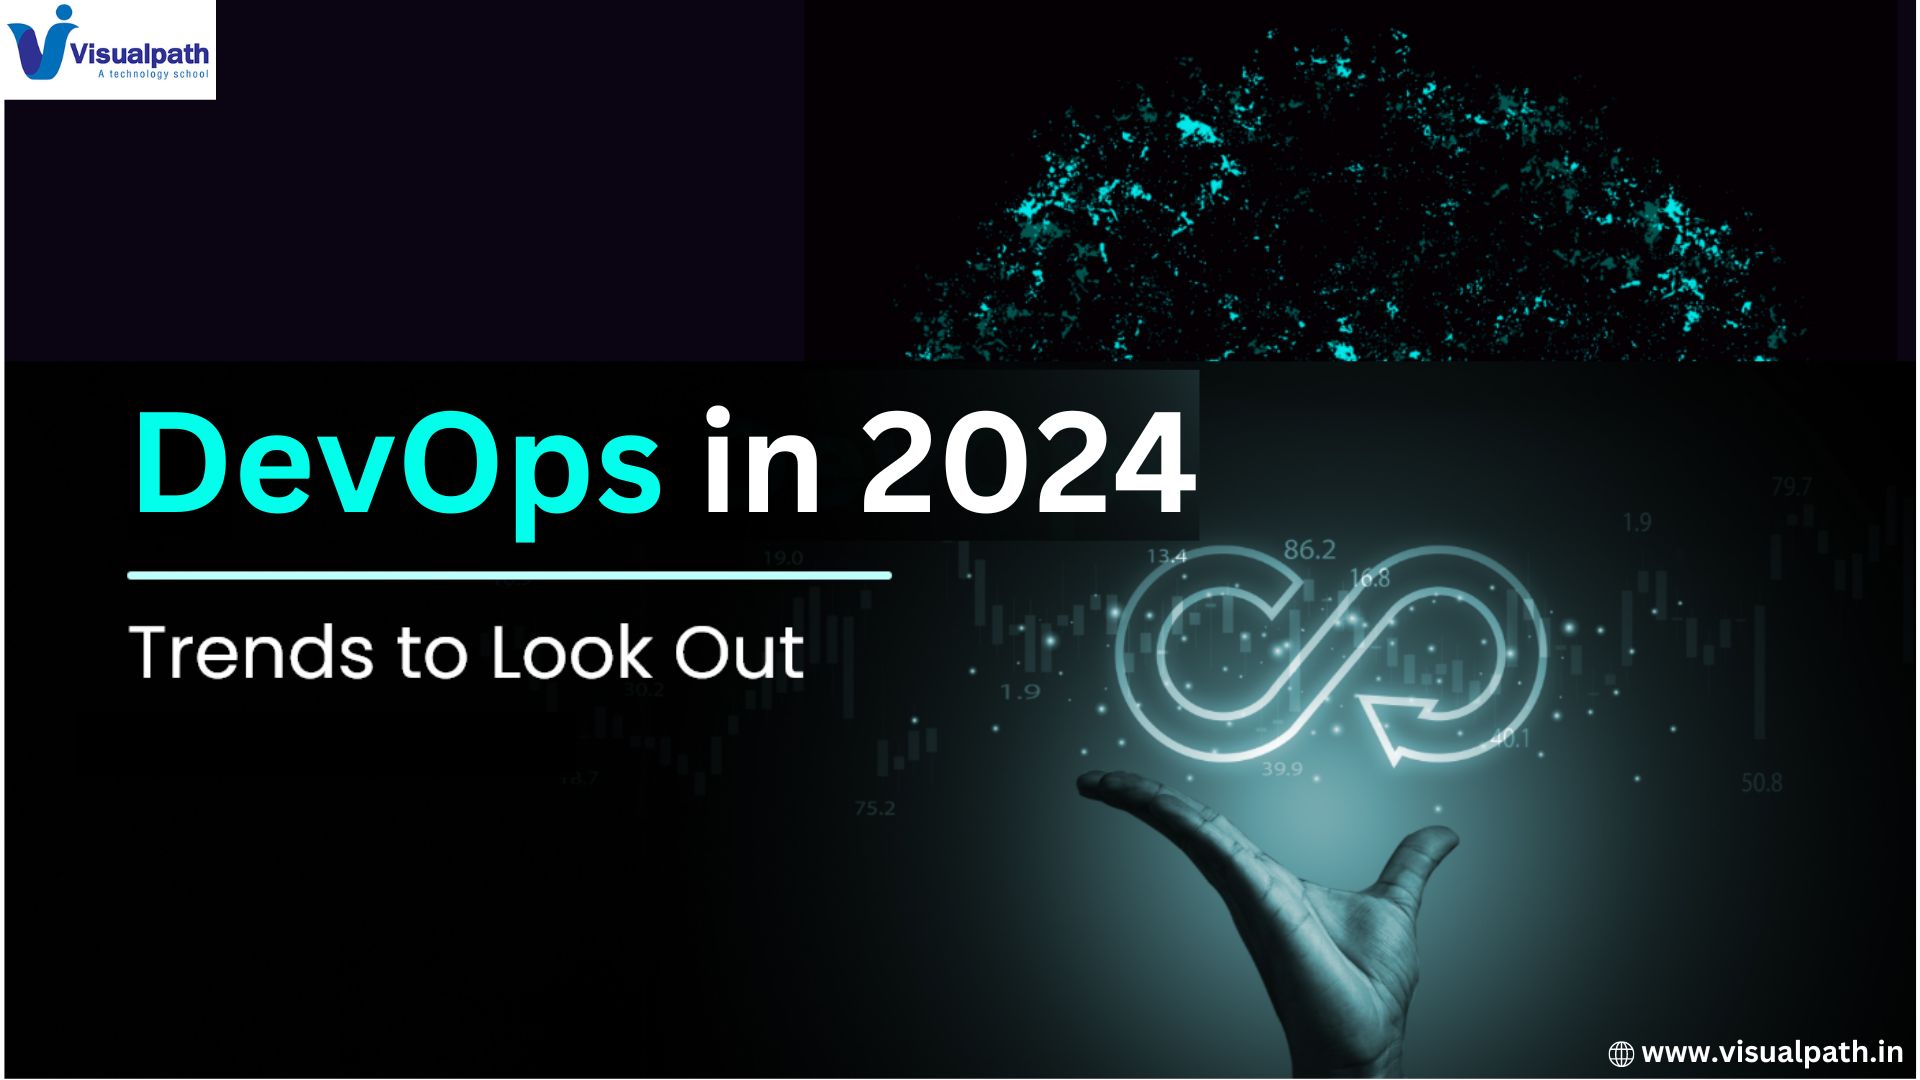 DevOps in 2024: A Symphony of Speed, Efficiency, and Reliability